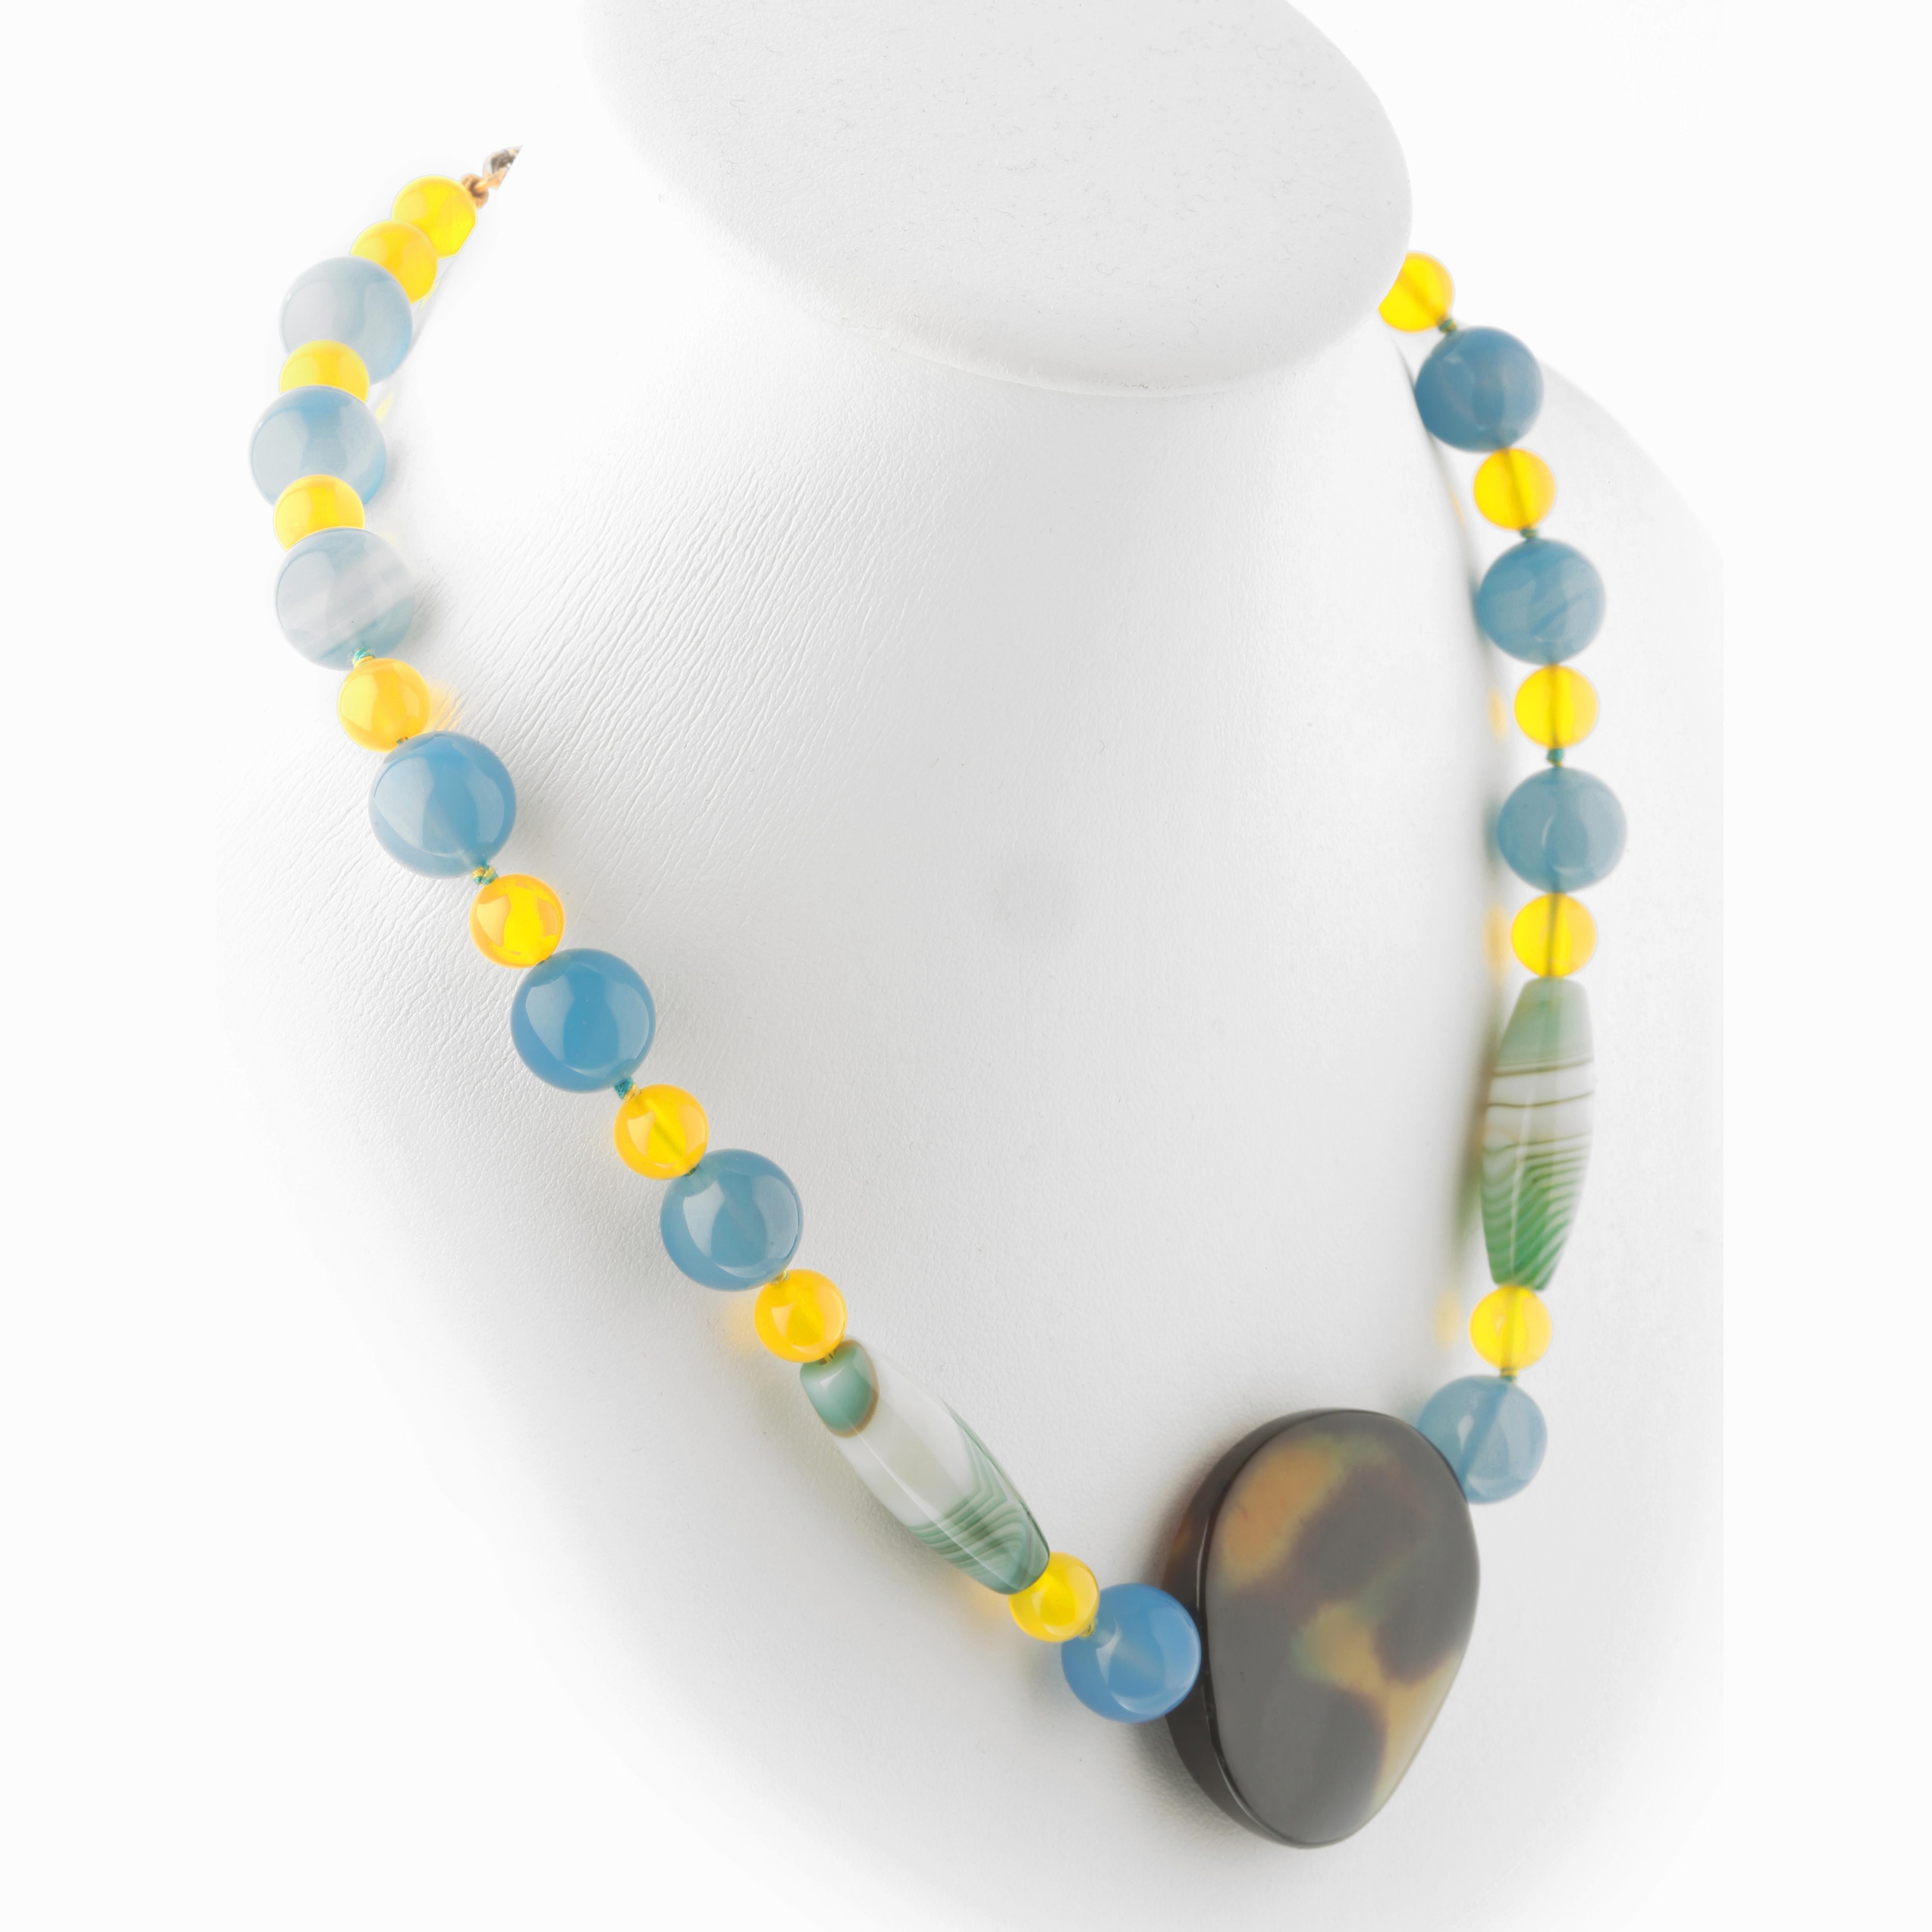 Light and luminous necklace with Agate and Citrine stones. Abstract jewellery 925 sterling silver piece inspired by the beauty of the diversity, asymmetry and color. Stunning masterpiece with a range of diverse gems and hues that rise into a